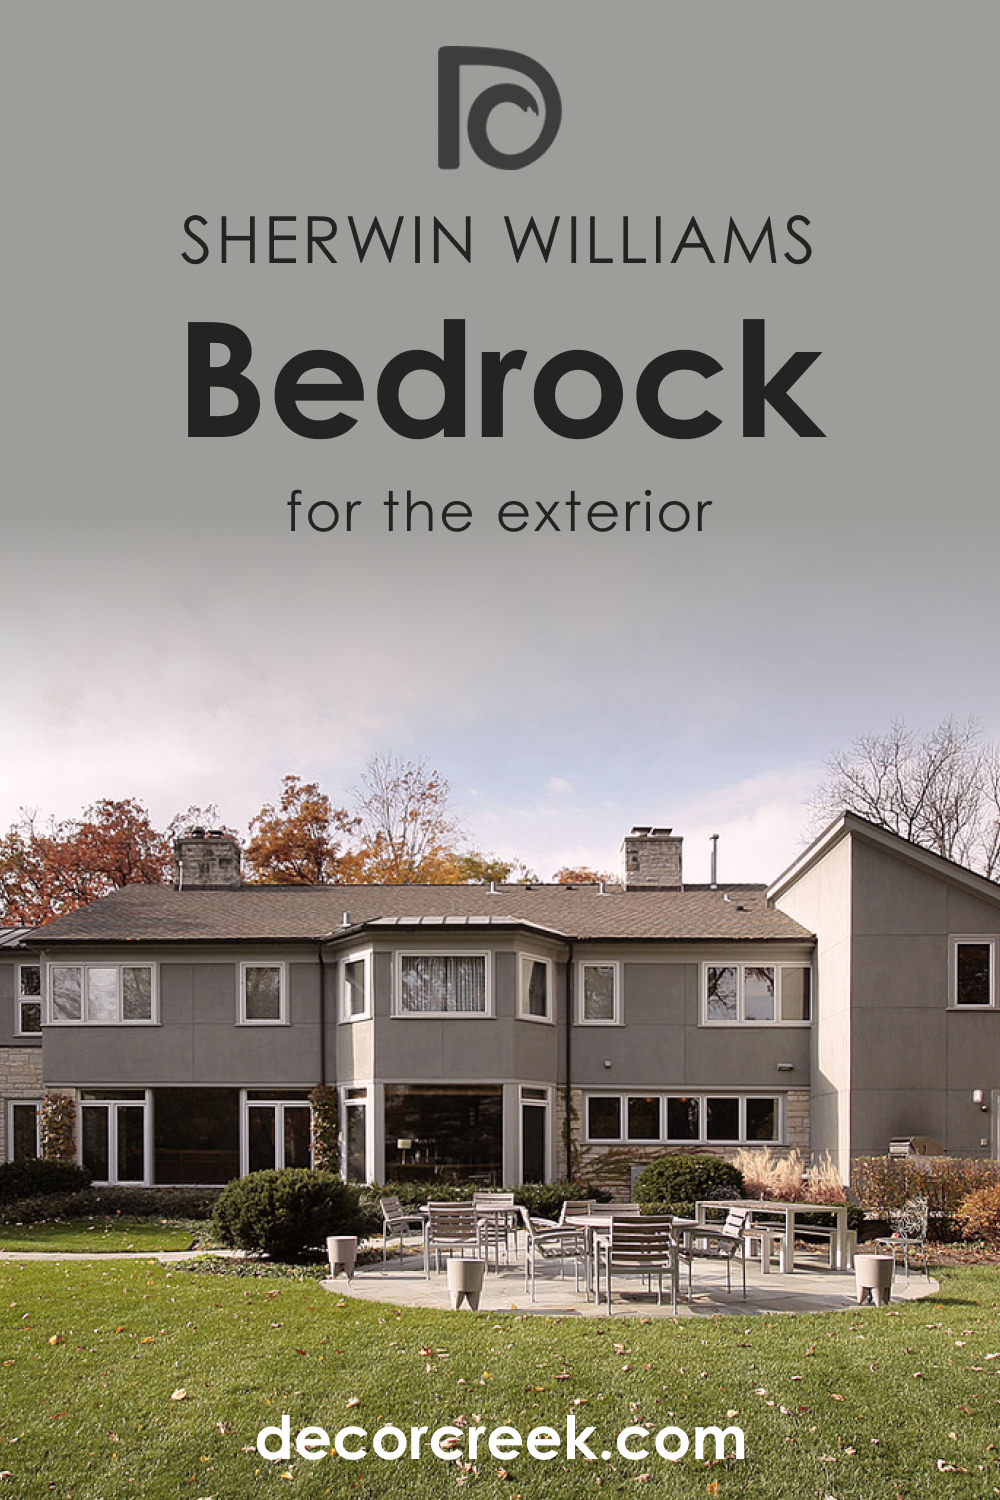 How to Use SW 9563 Bedrock for an Exterior?